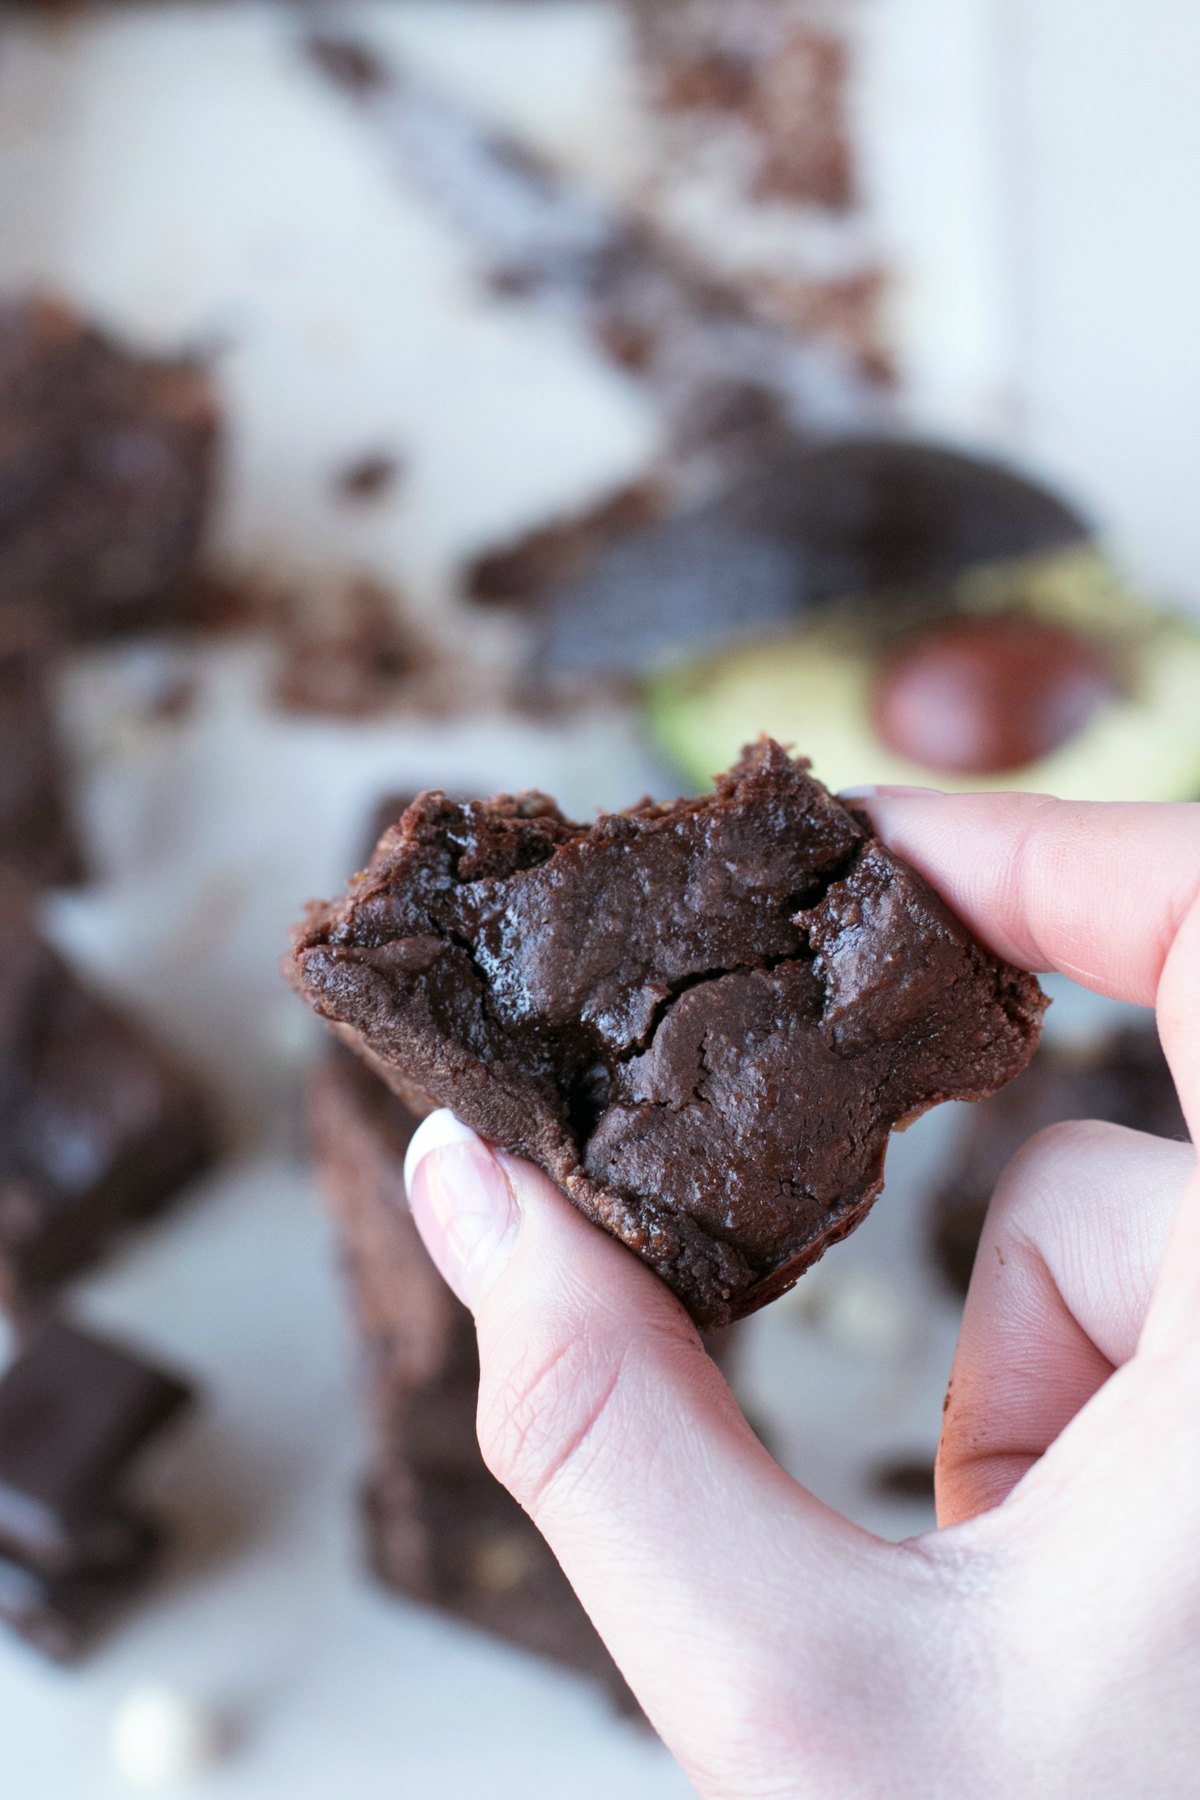 A hand holding a single avocado brownie with a bite out above other brownies in background